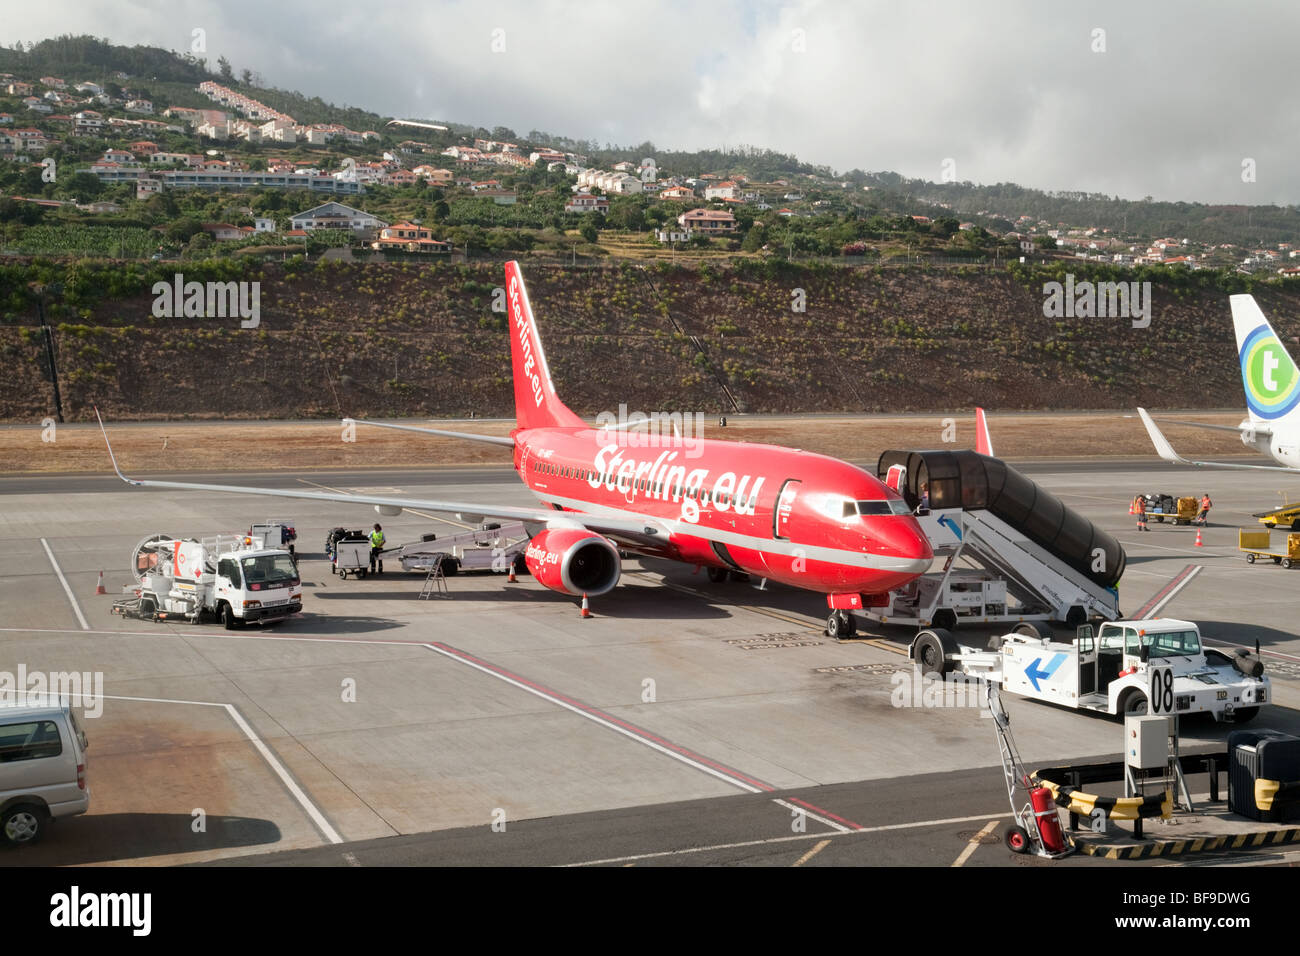 A Sterling plane on the tarmac, Funchal airport, Funchal, Madeira Stock Photo